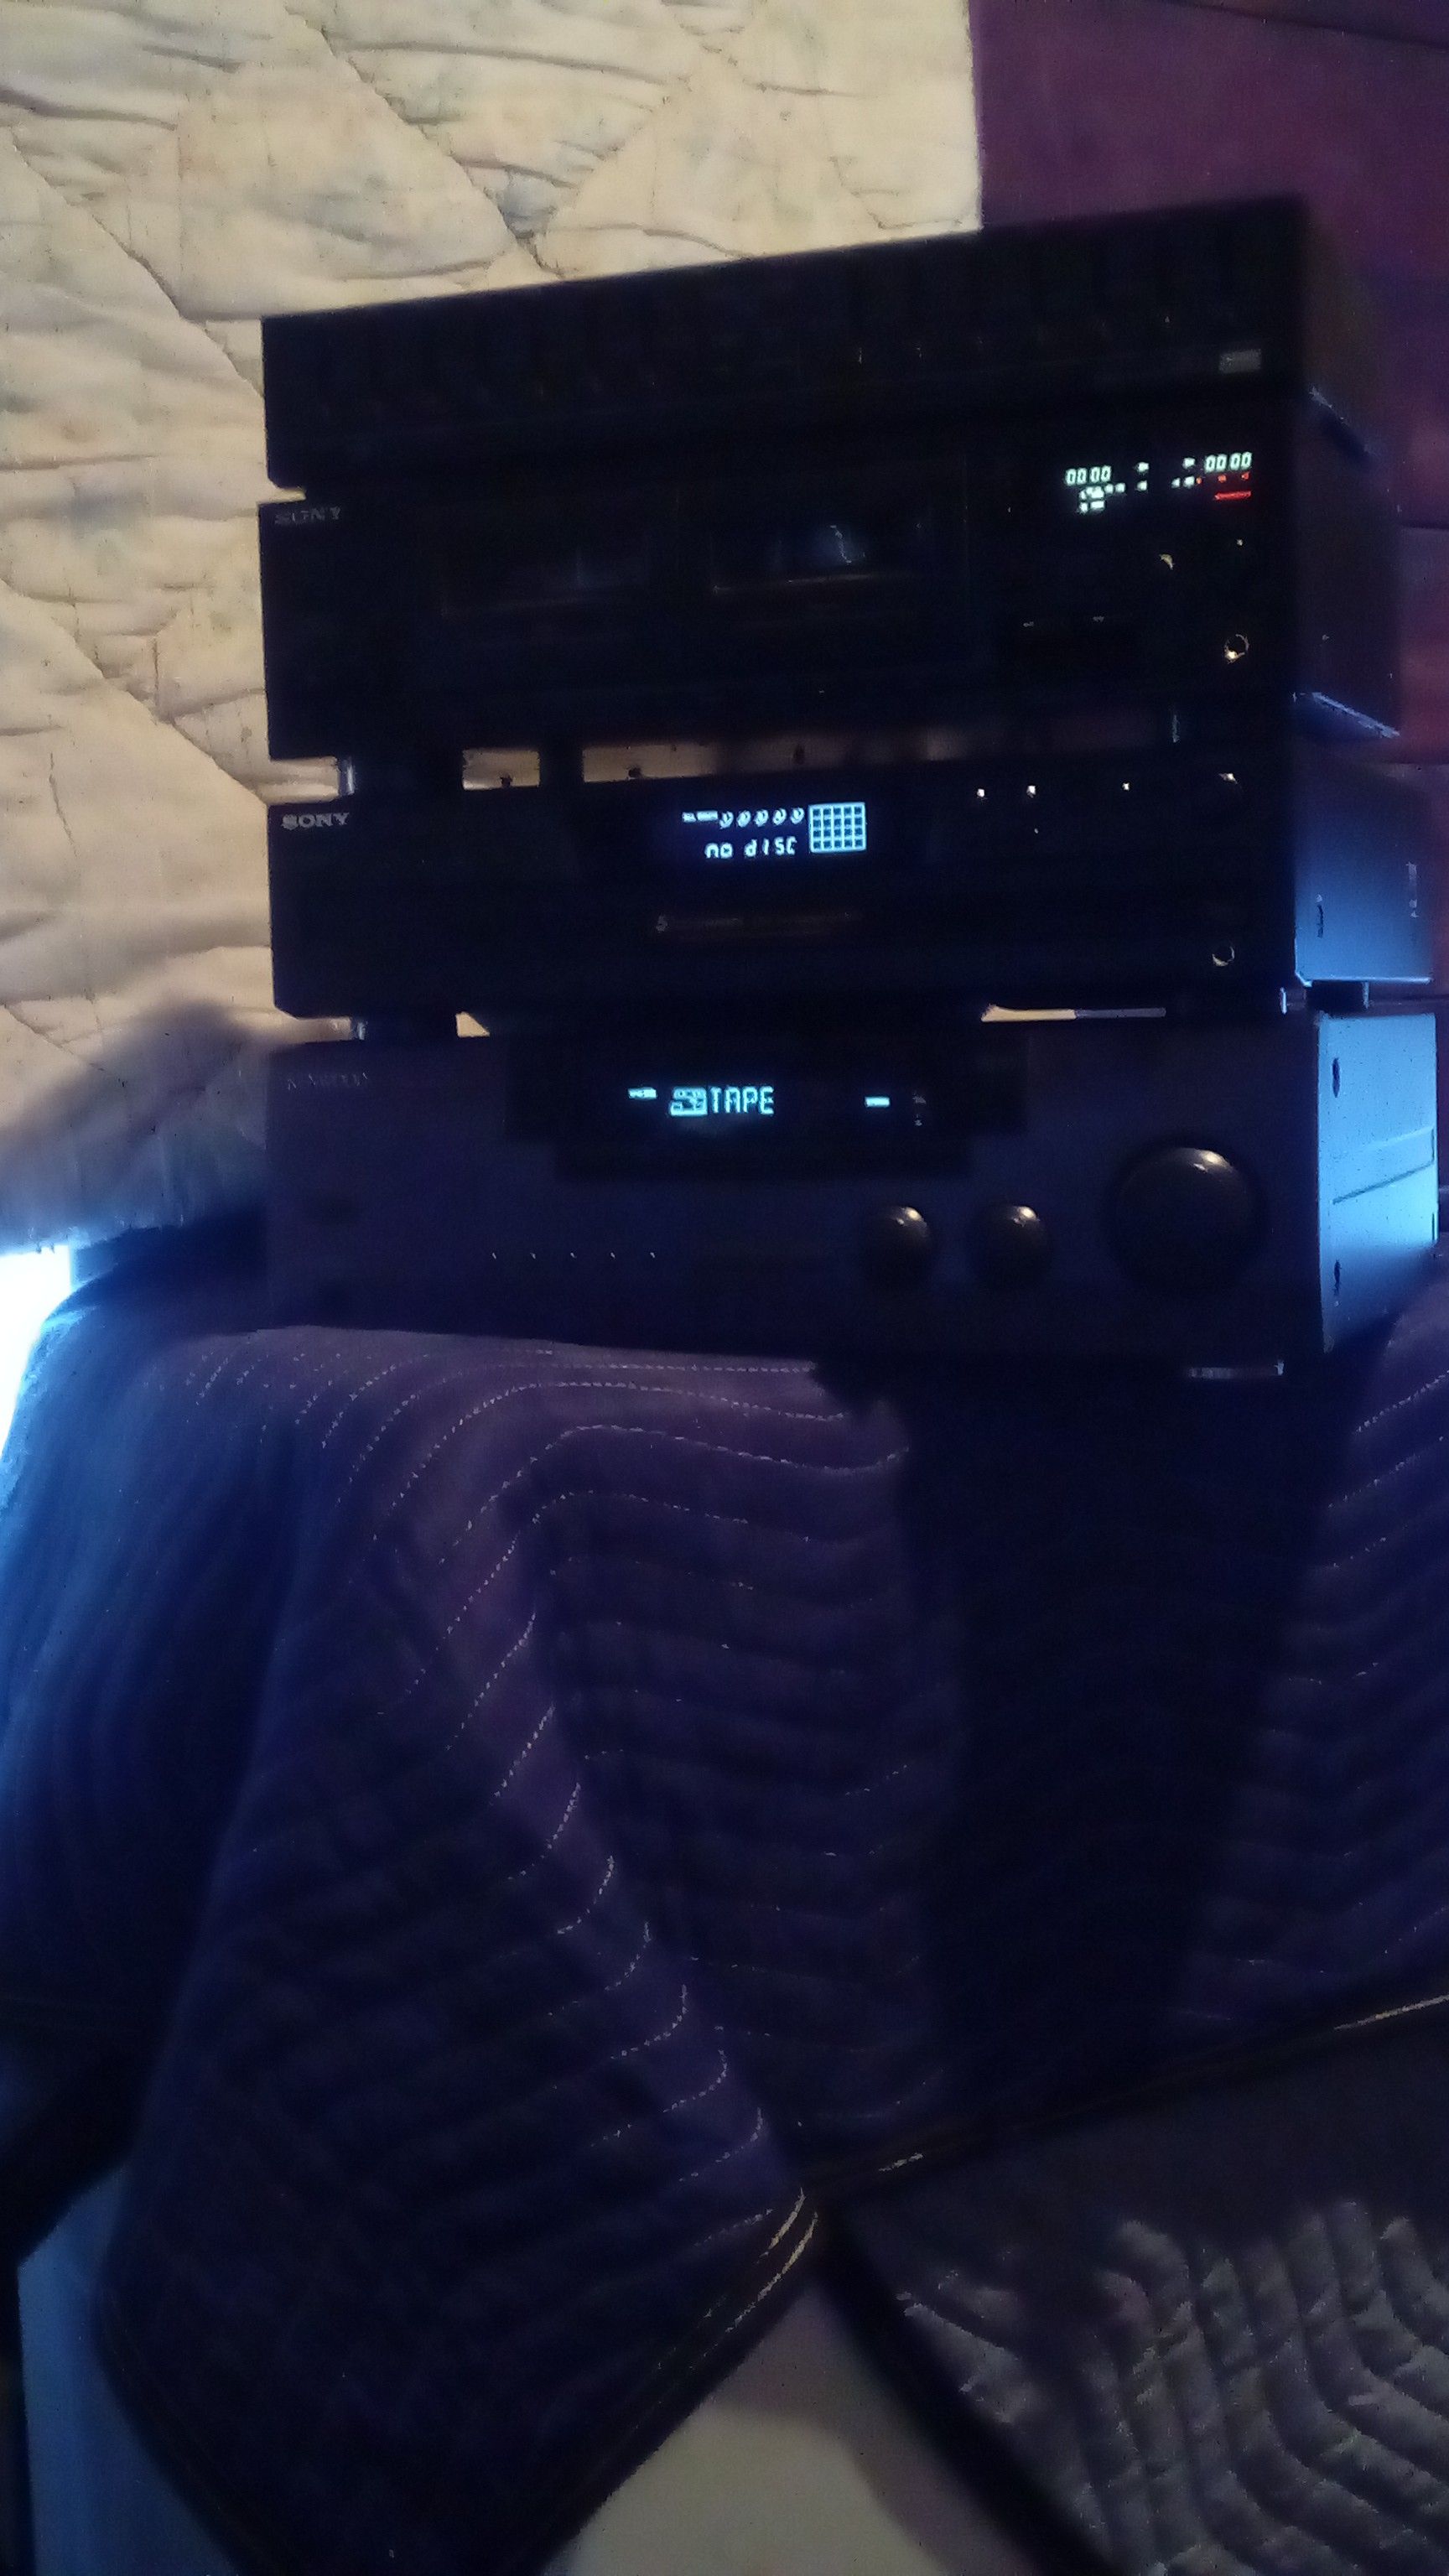 House stereo system kenwood receiver Sony 5 disc CD player and a Sony cassette double tape and eq also six speakers in a mini sub Sharp brand